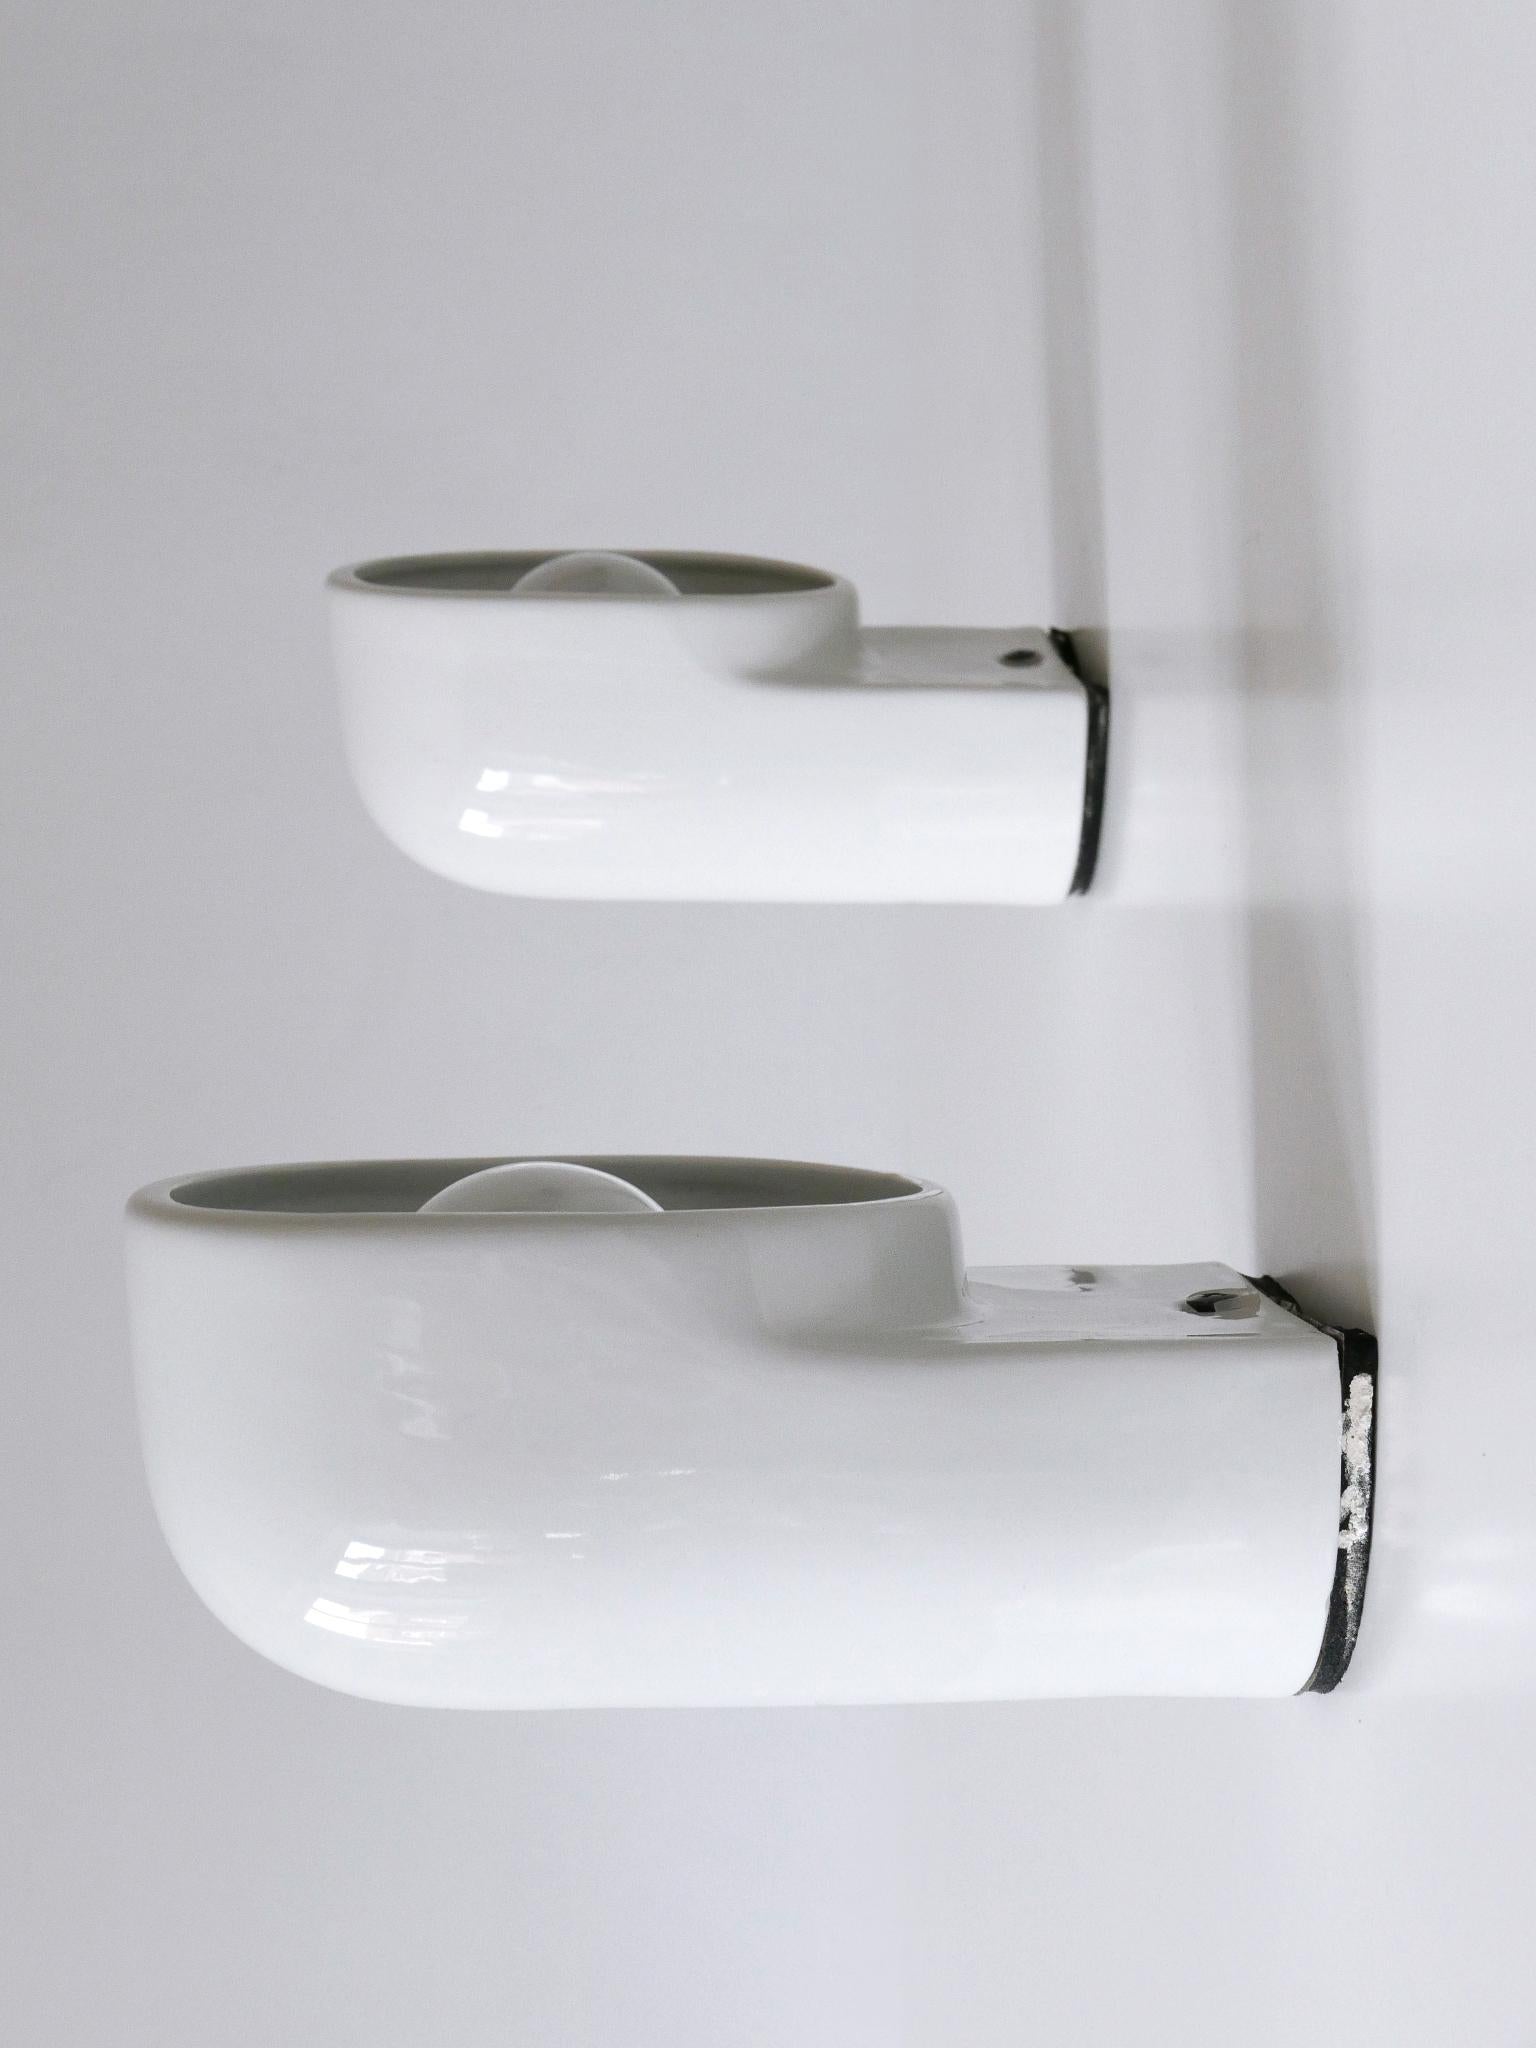 German Set of Two Mid-Century Modern Up & Down Lighter Sconces Pafo by Artemide 1970s